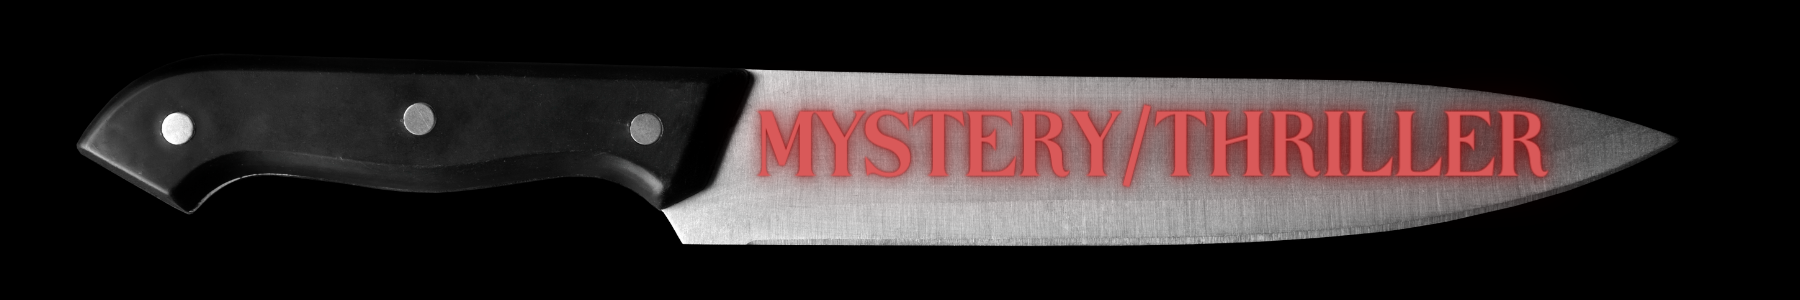 Mystery/thriller graphic